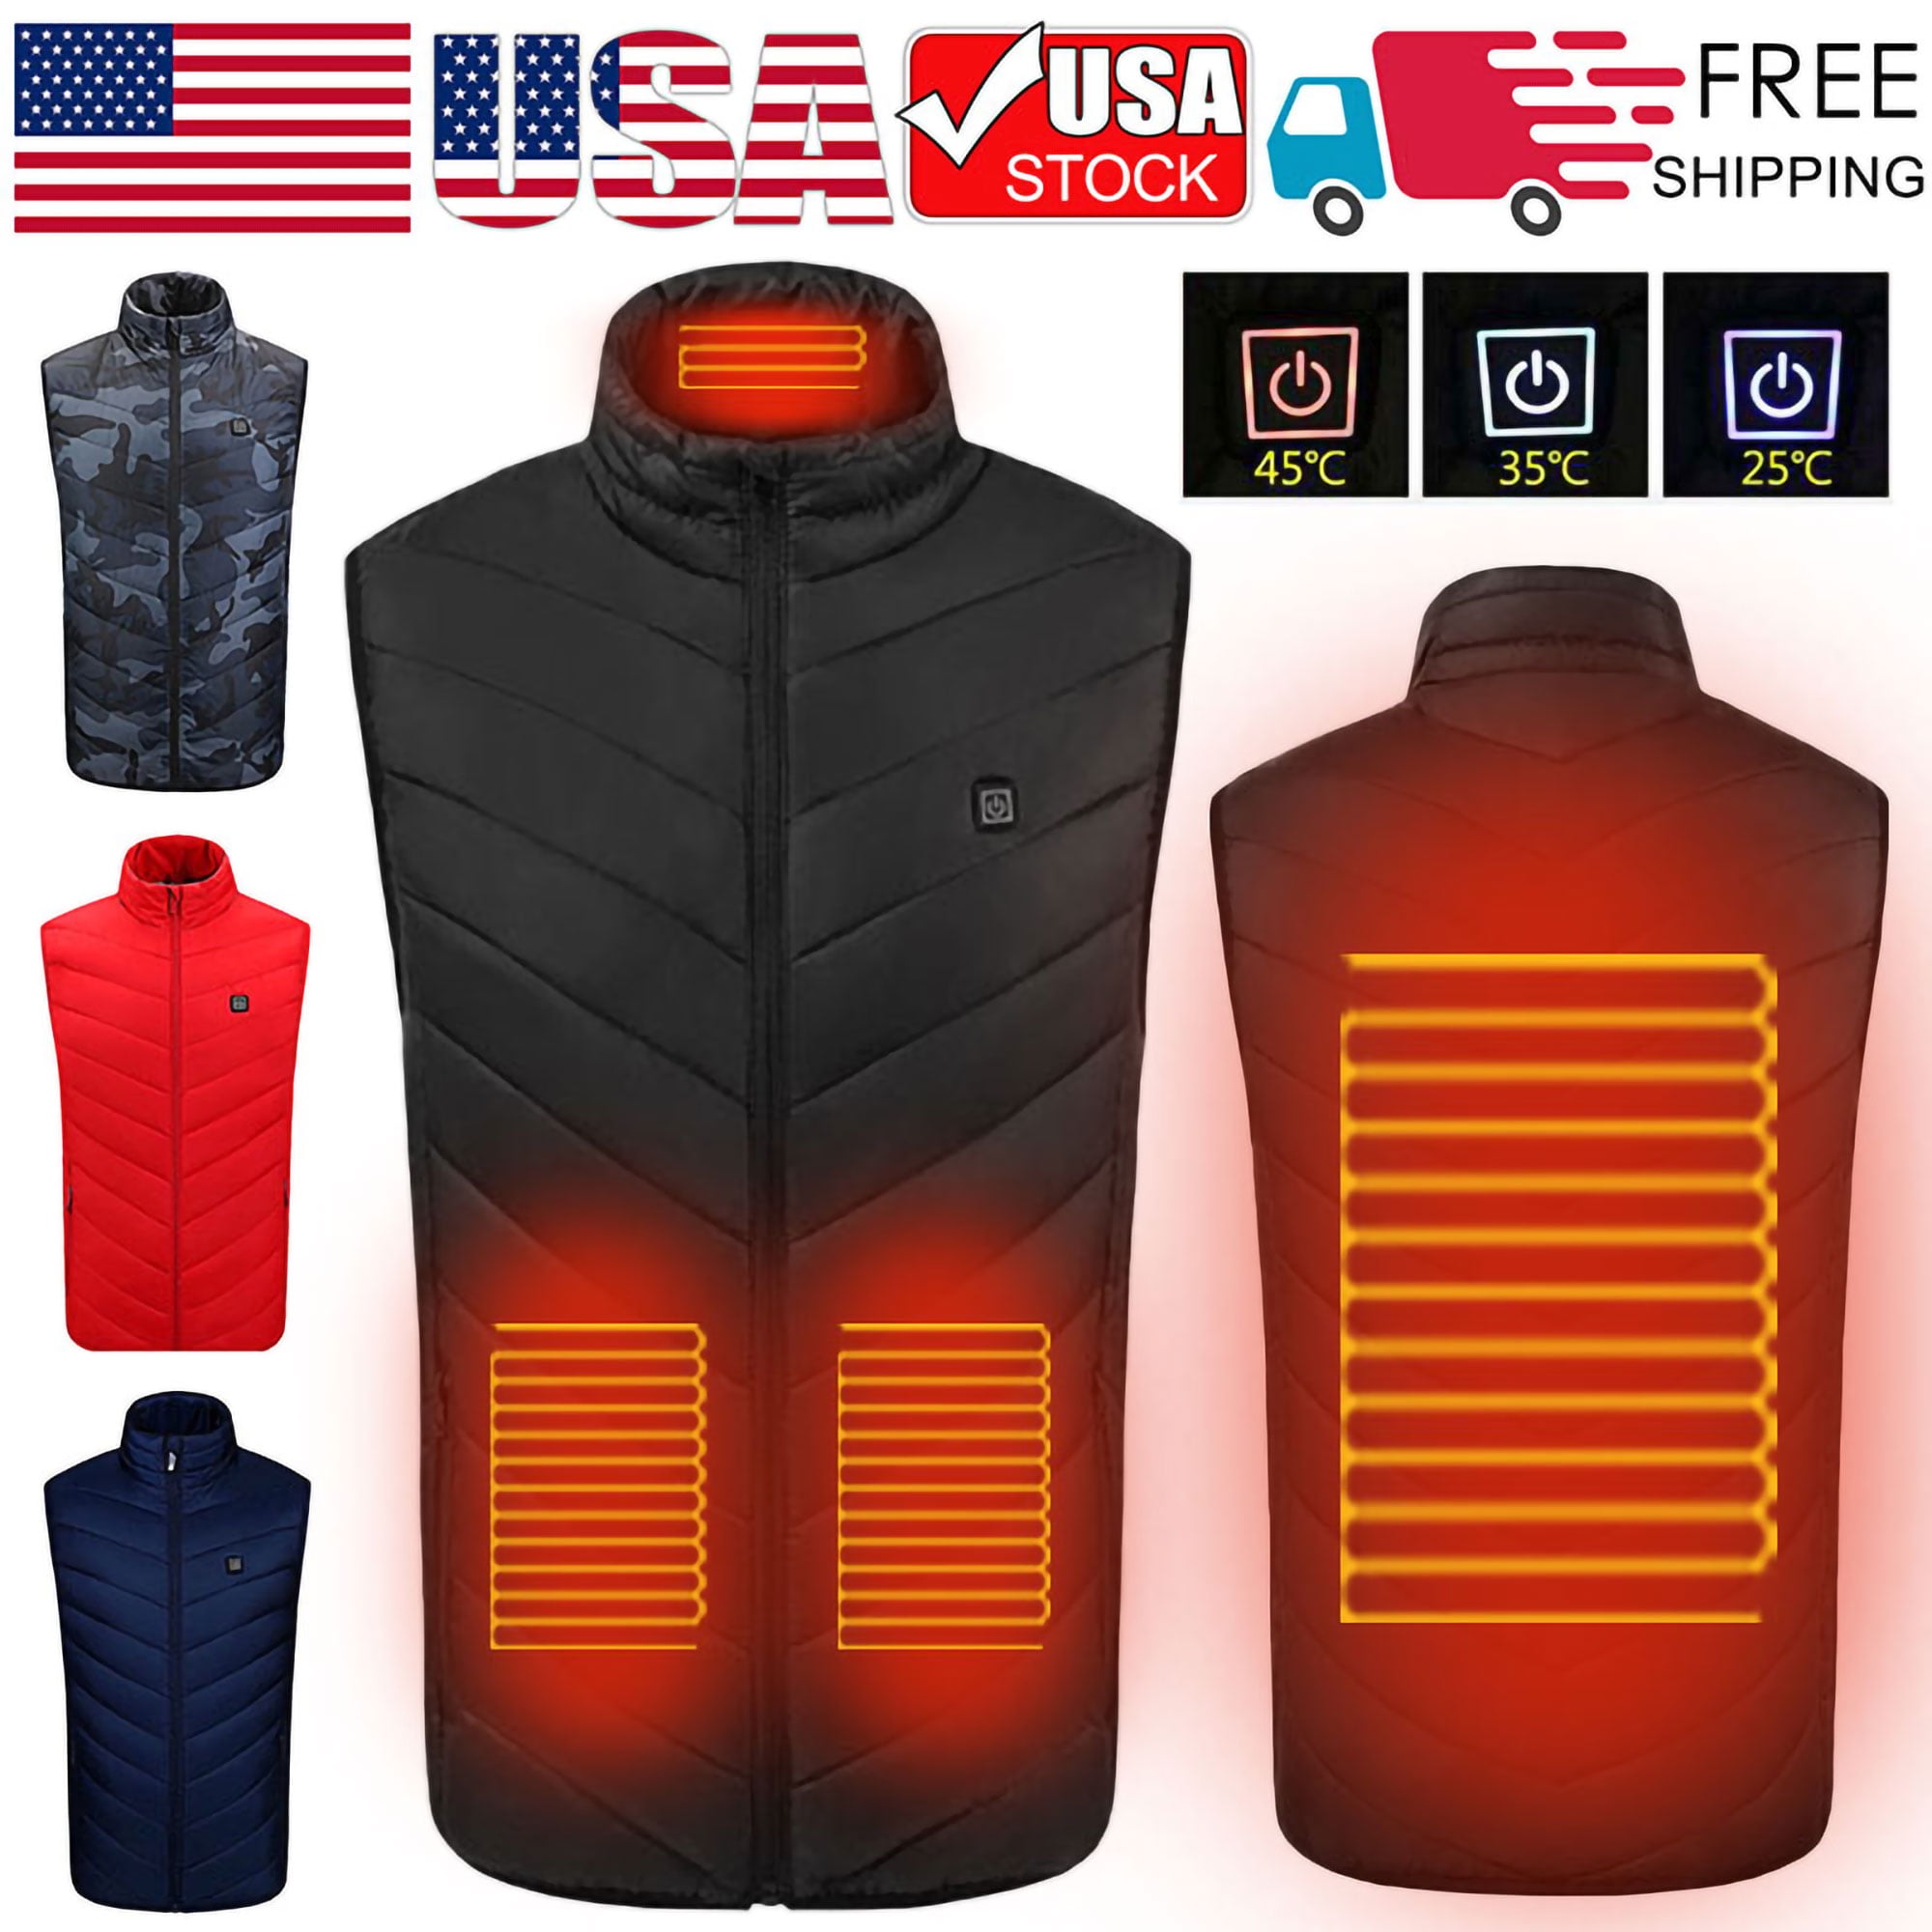 Electric vest,Electric Heated Vest,Electric Jacket with USB Charging Insert Men Women Winter Warmer Gilet with 3 files Adjustable Temperature for Outdoor Skiing,Hiking,Hunting,Motorcycle,Camping 